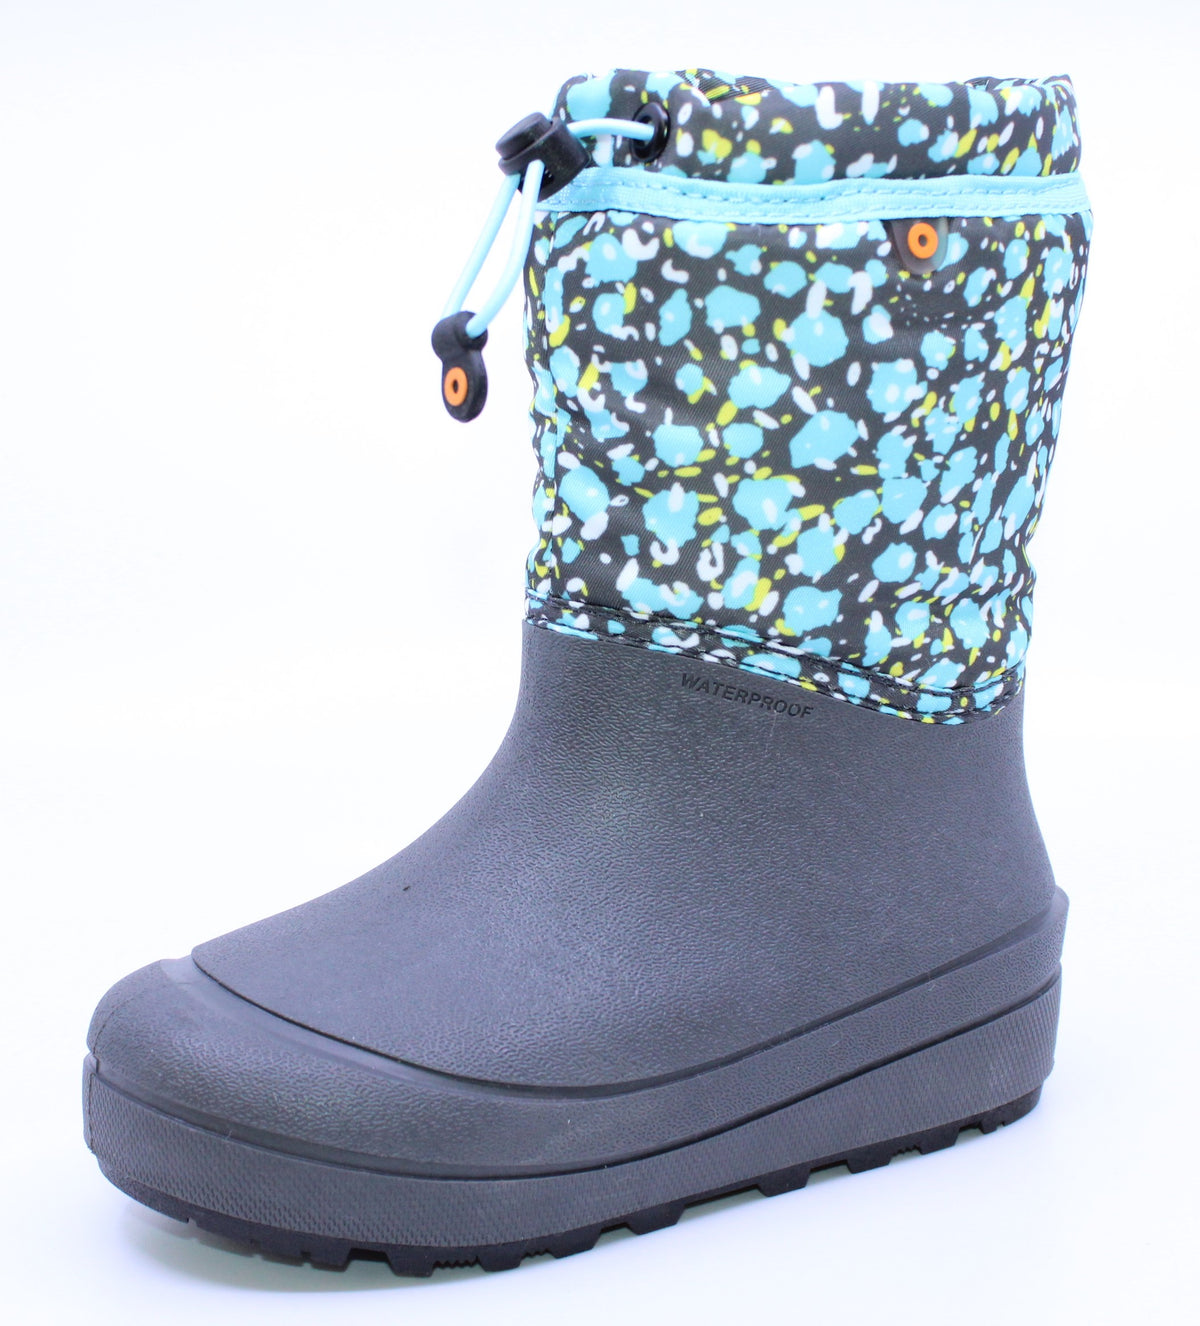 Bottes d'hiver Bogs Snow Shell Animal F Fille